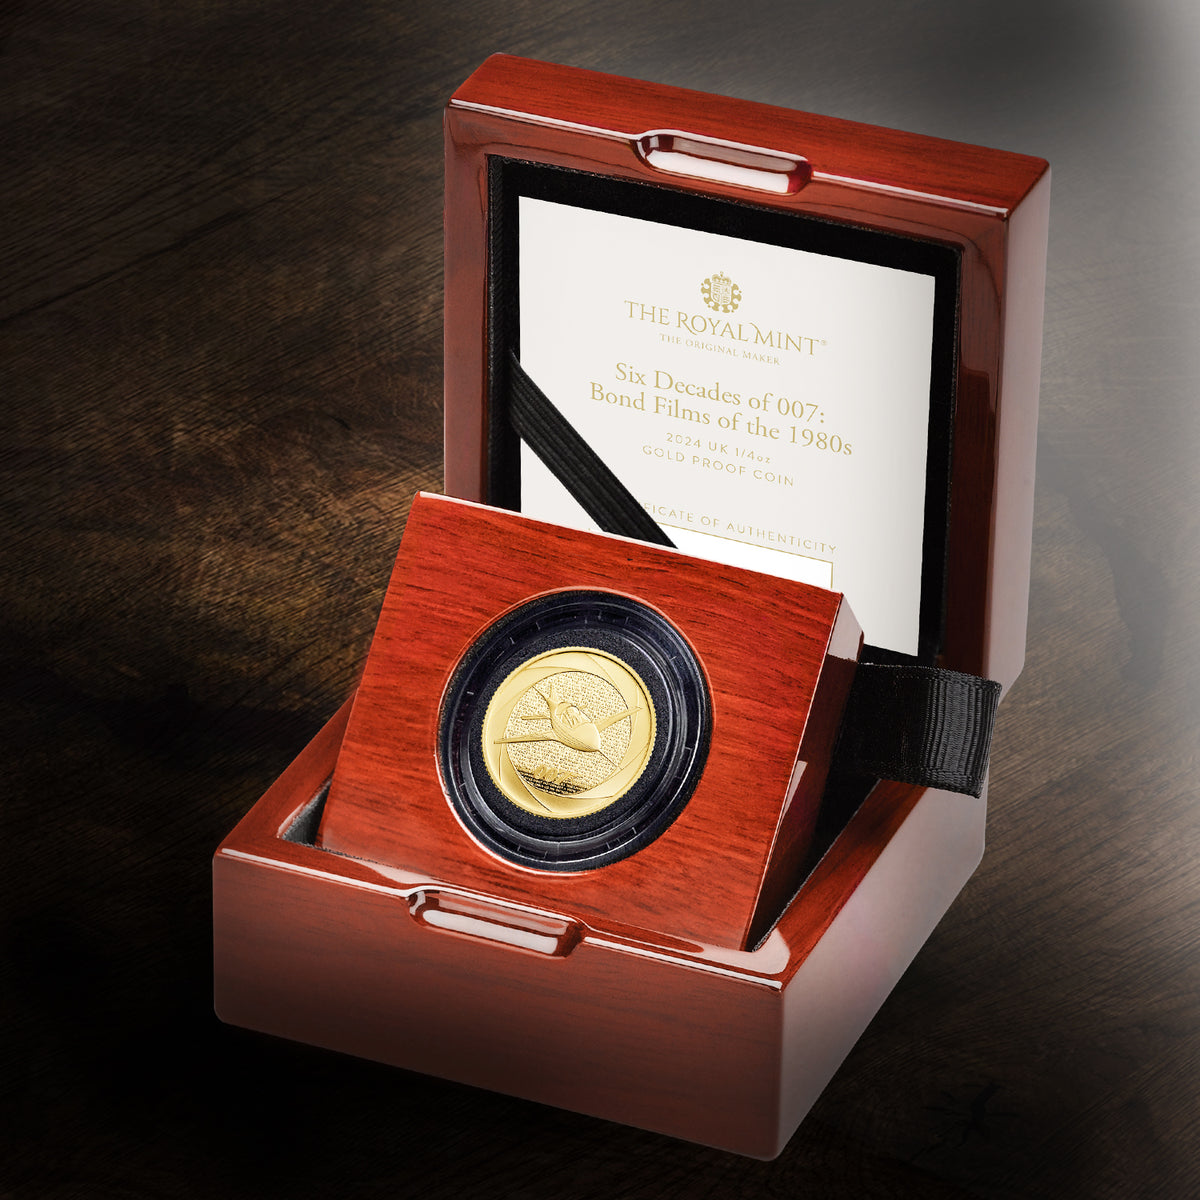 James Bond 1/4oz Gold Proof Coin - 1980s Numbered Edition - By The Royal Mint